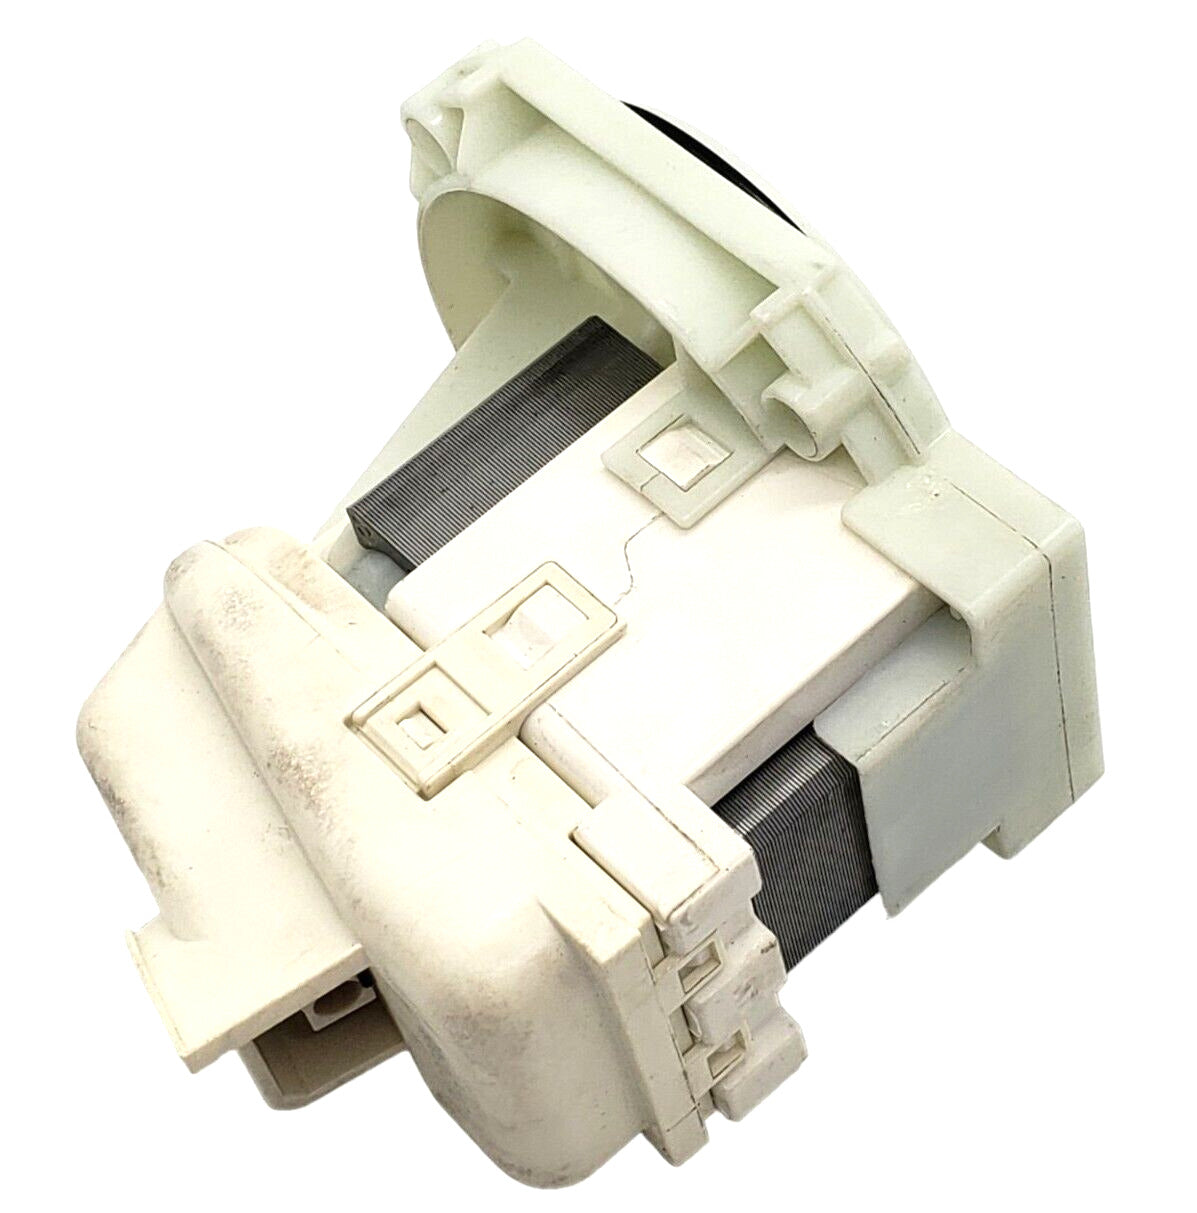 Genuine OEM Replacement for Frigidaire Dishwasher Pump A11951402